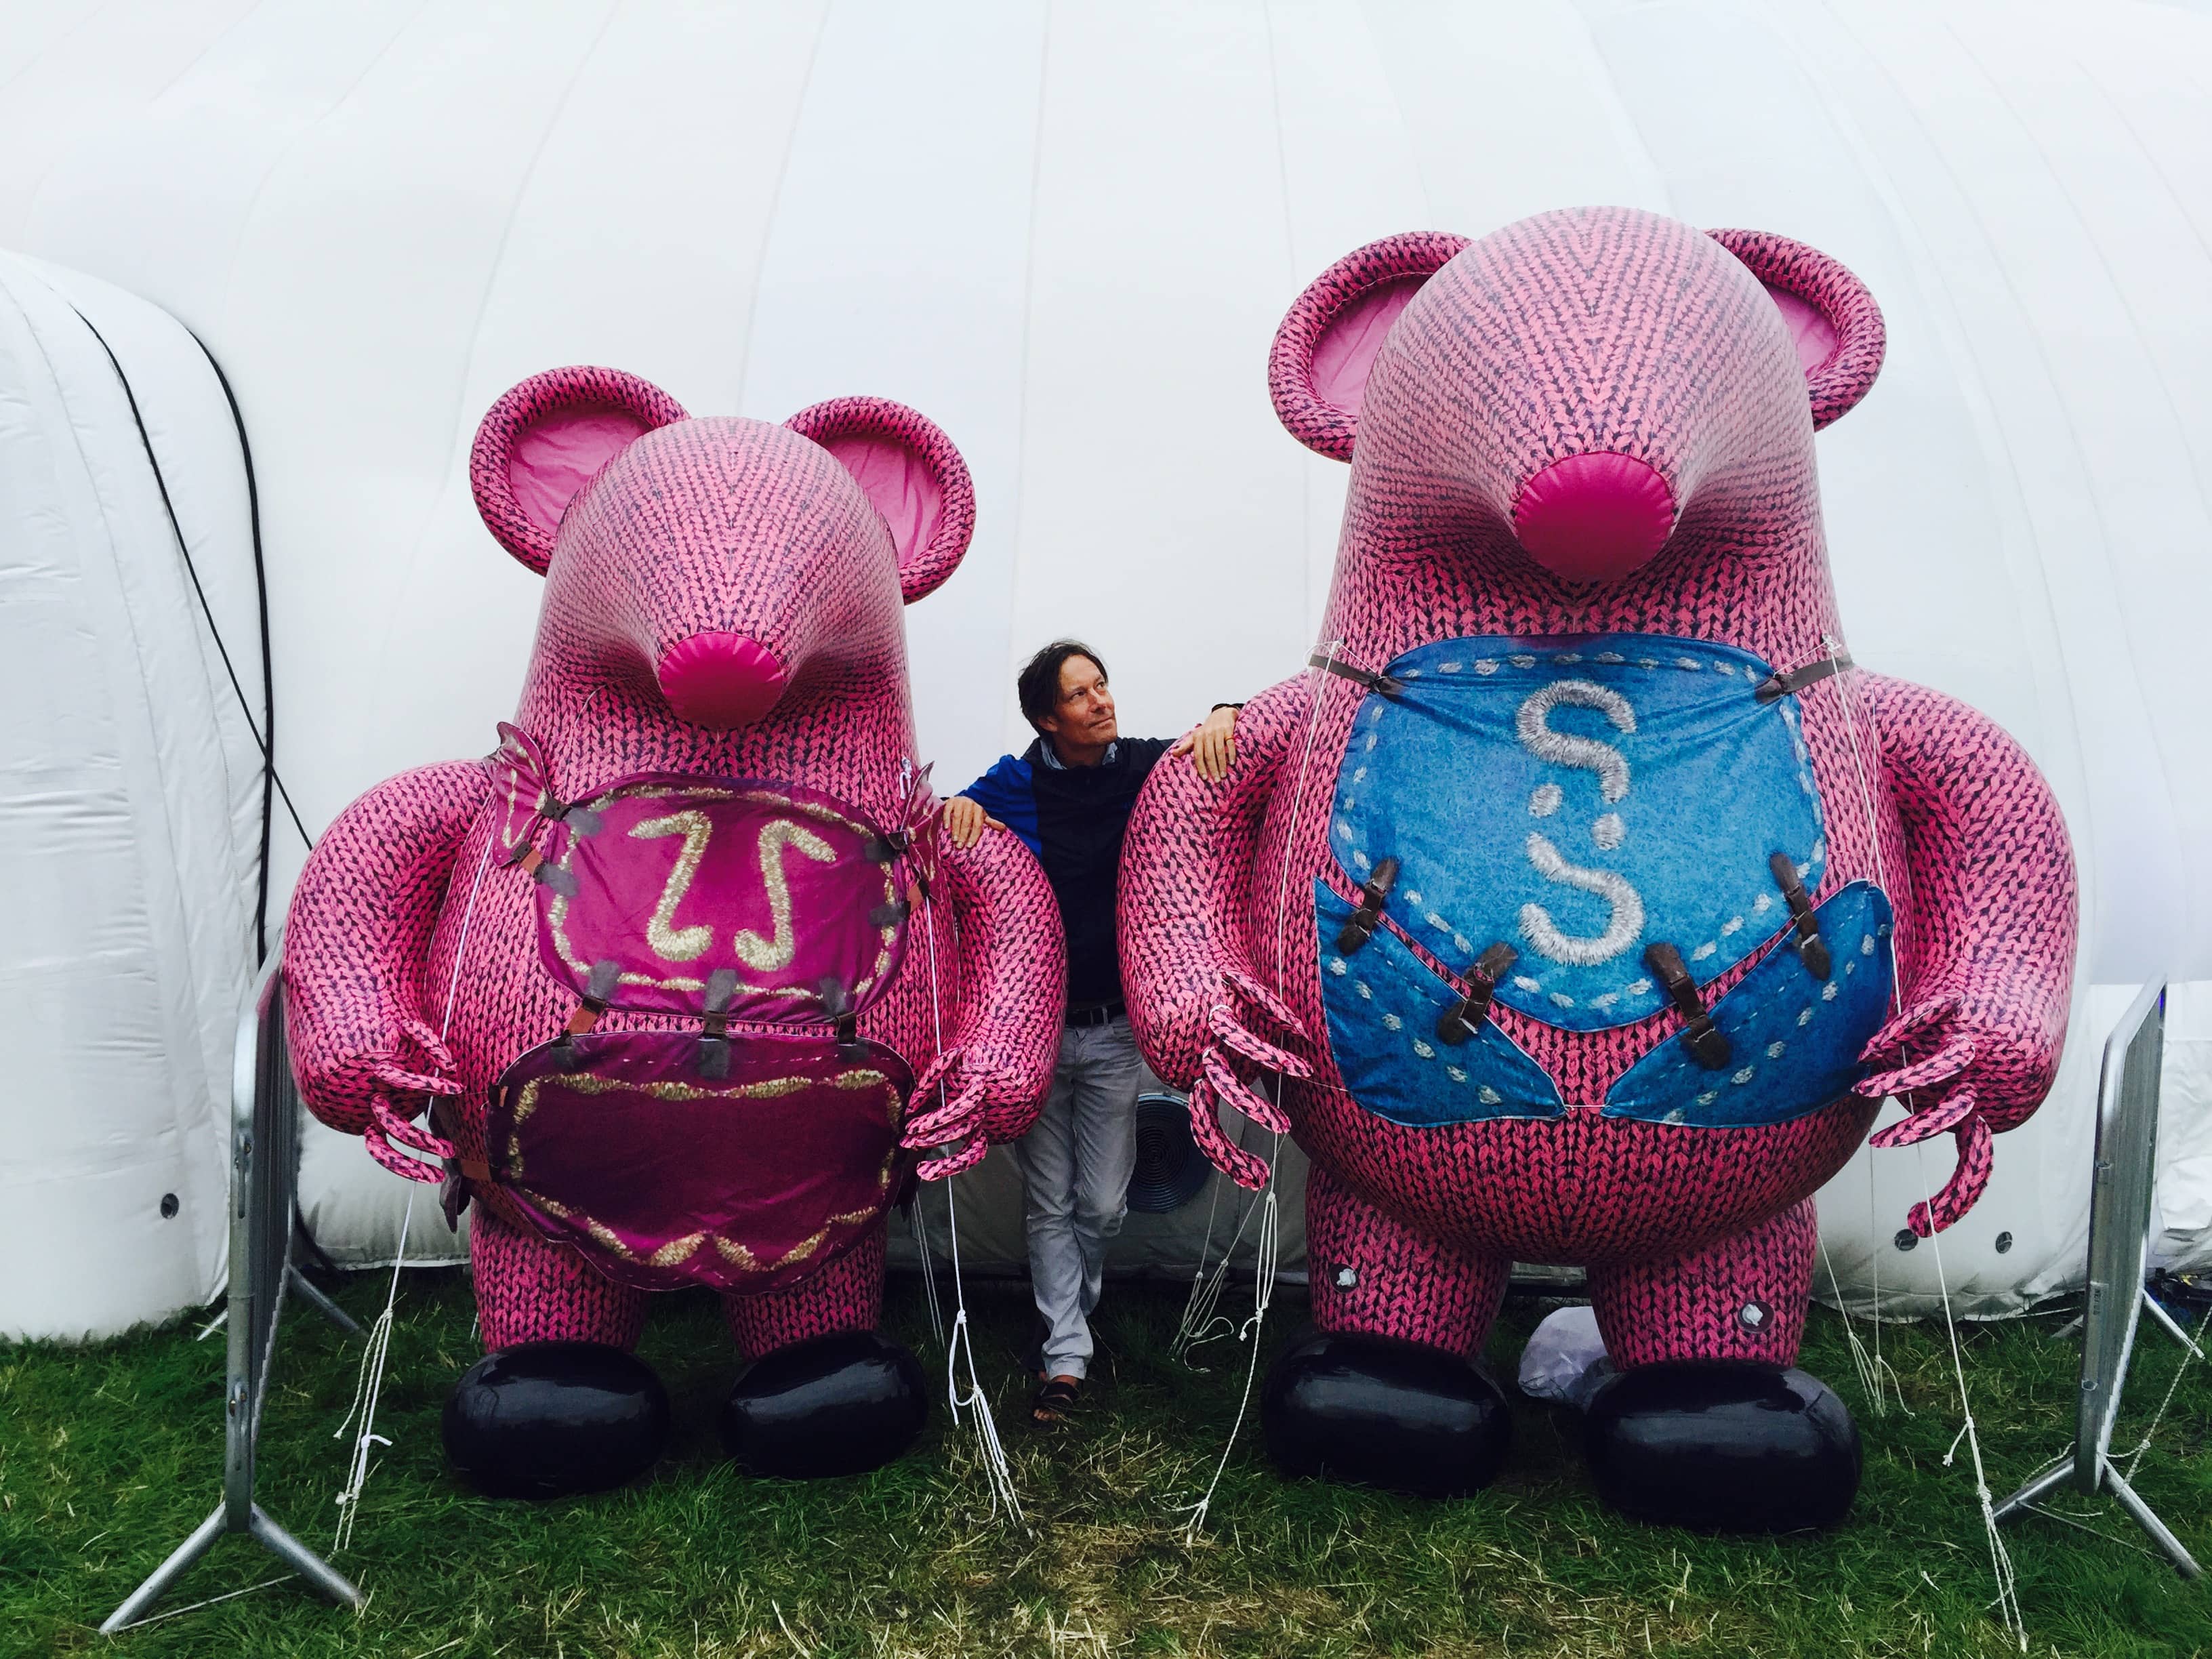 Andrew stood between two large pink mouse sculptures.